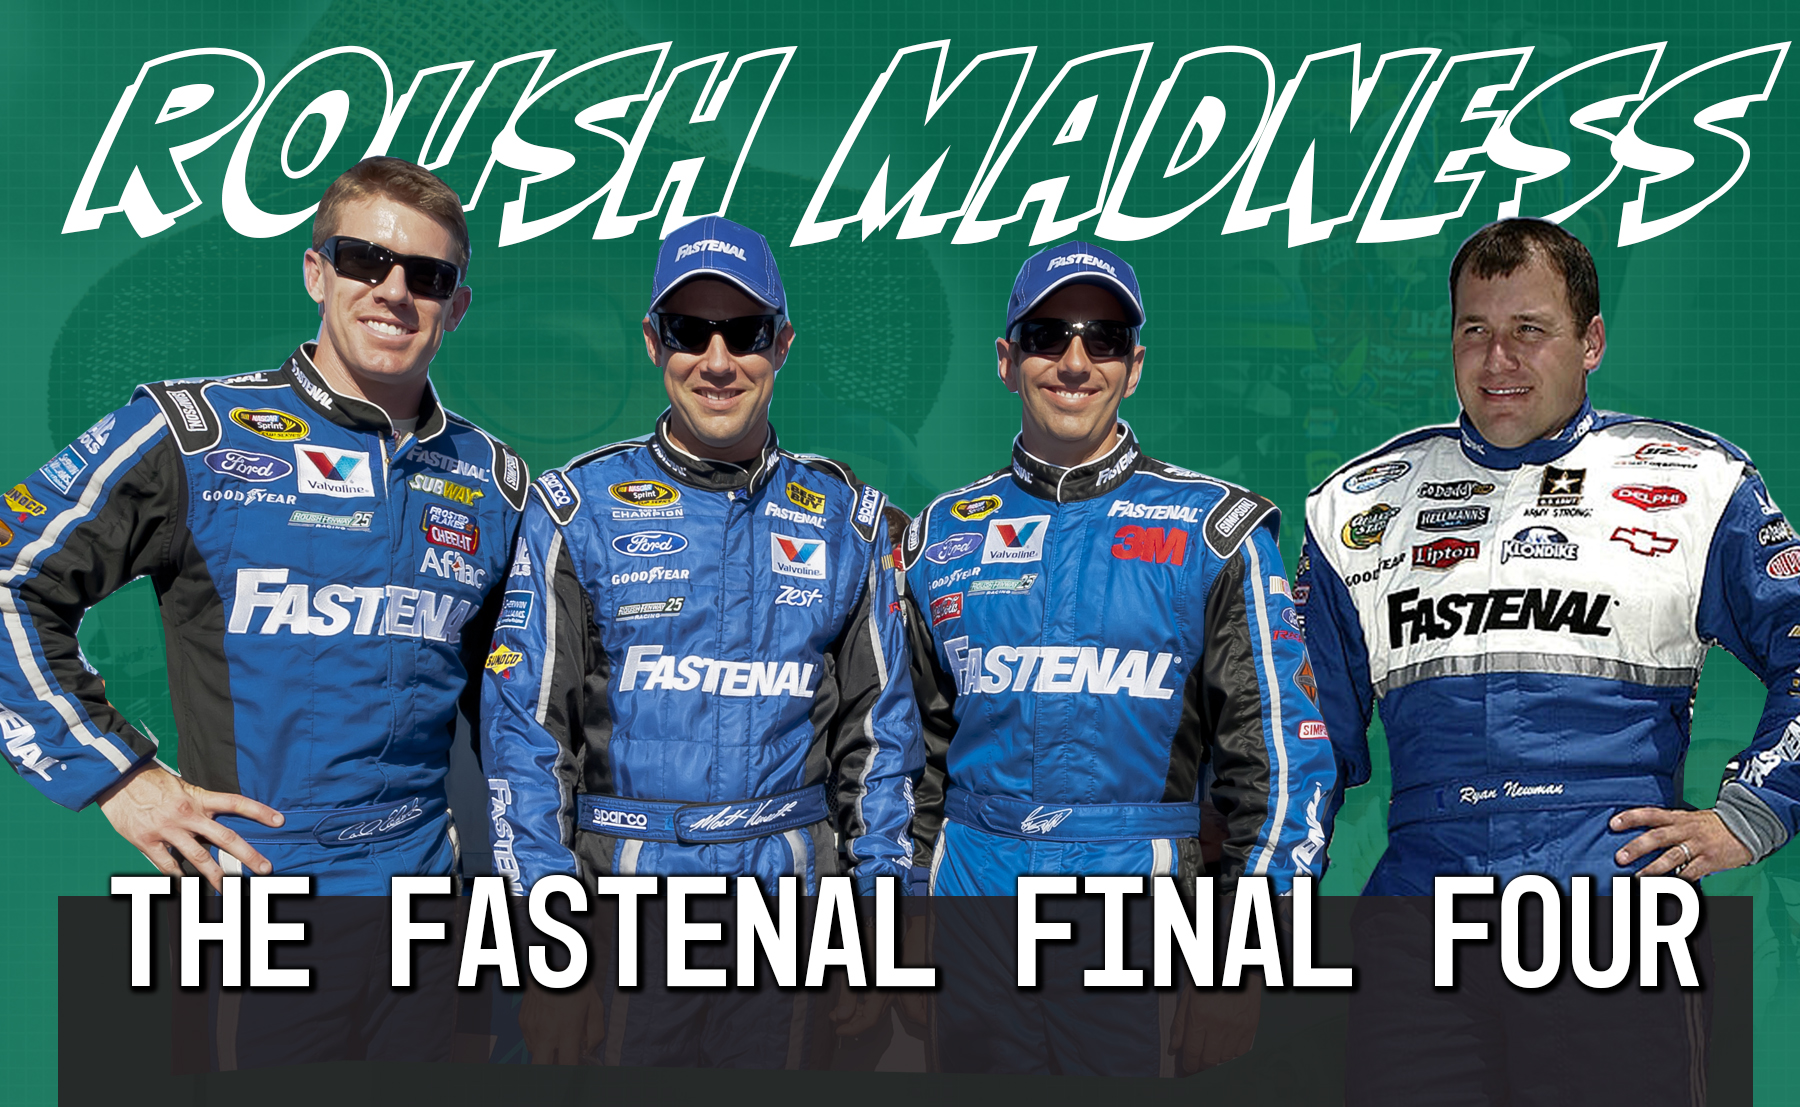 Final Four Set in #RoushMadness